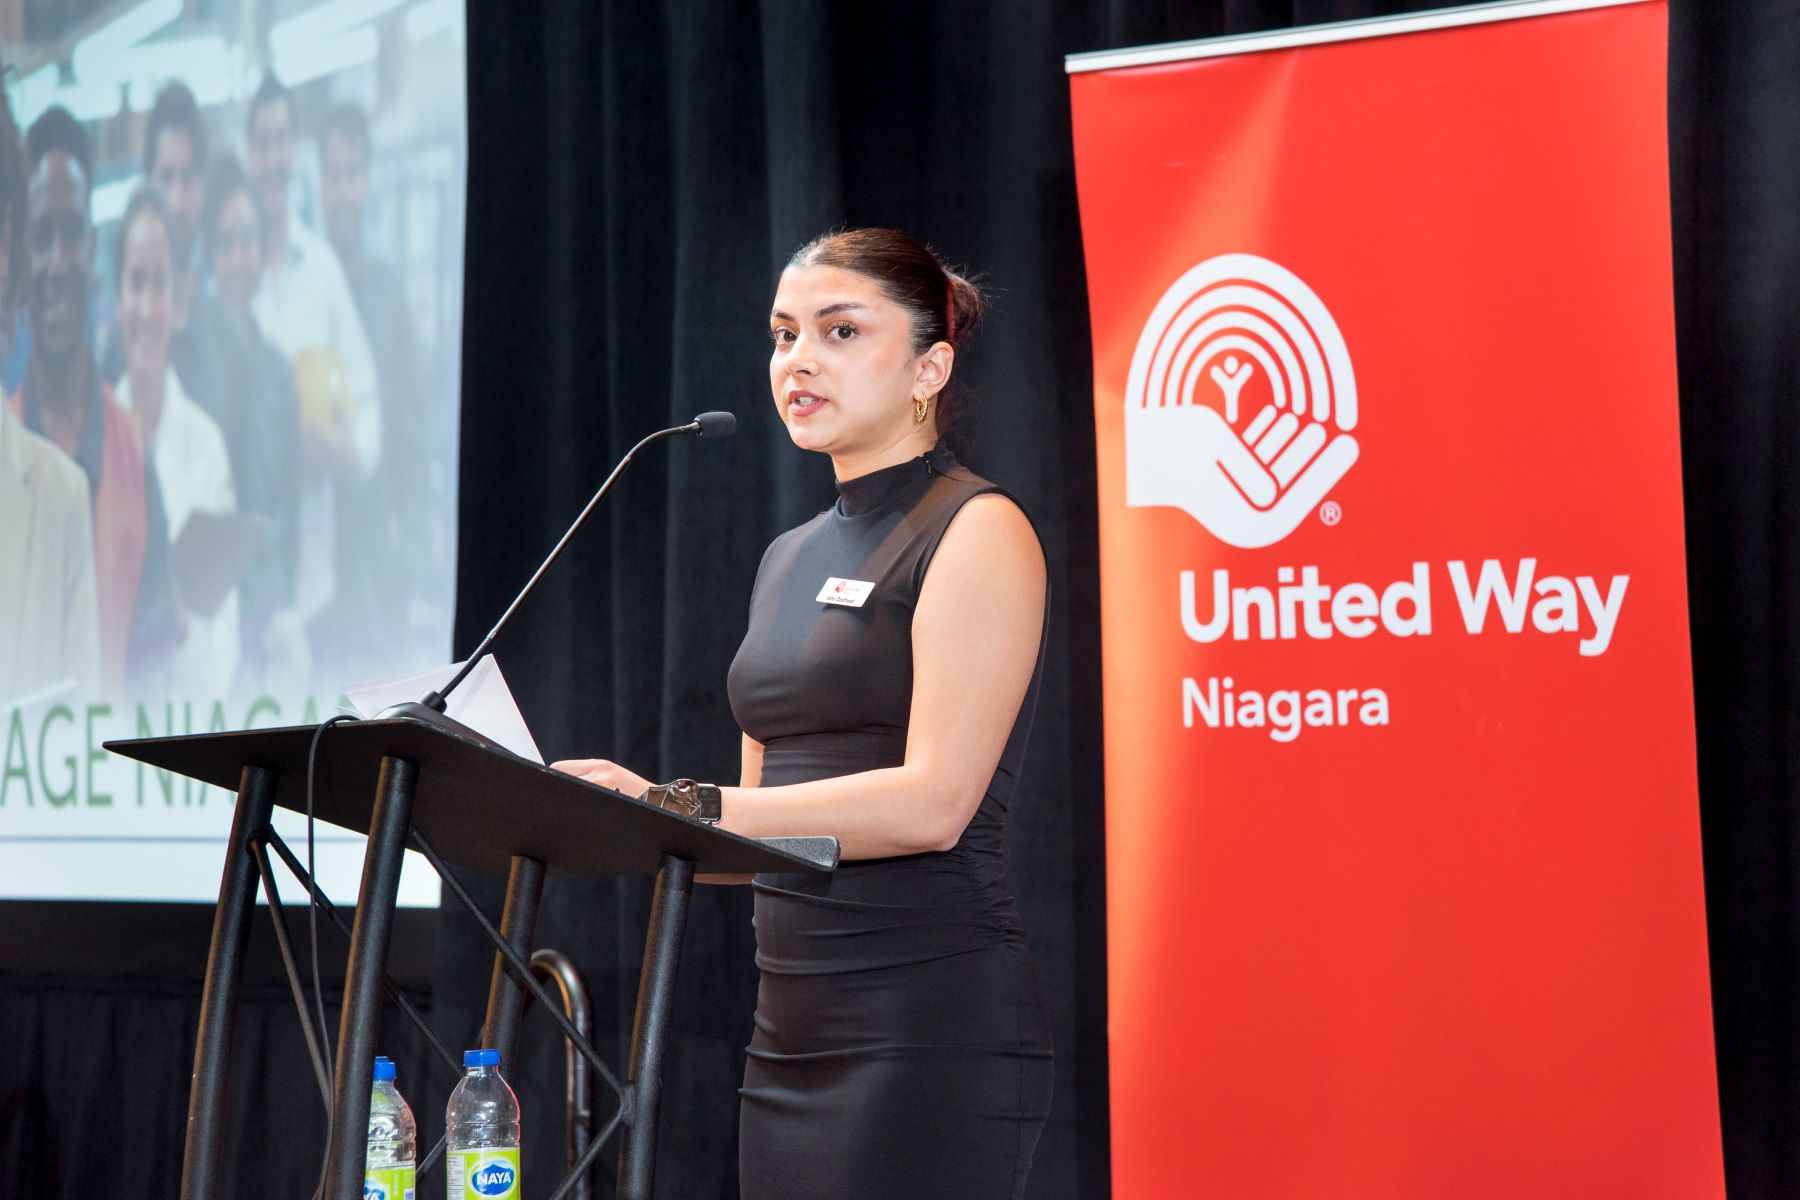 Isha Dadhwal, program coordinator, at the podium, speaking at International Women’s Day event about the benefit and importance of earning a living wage.